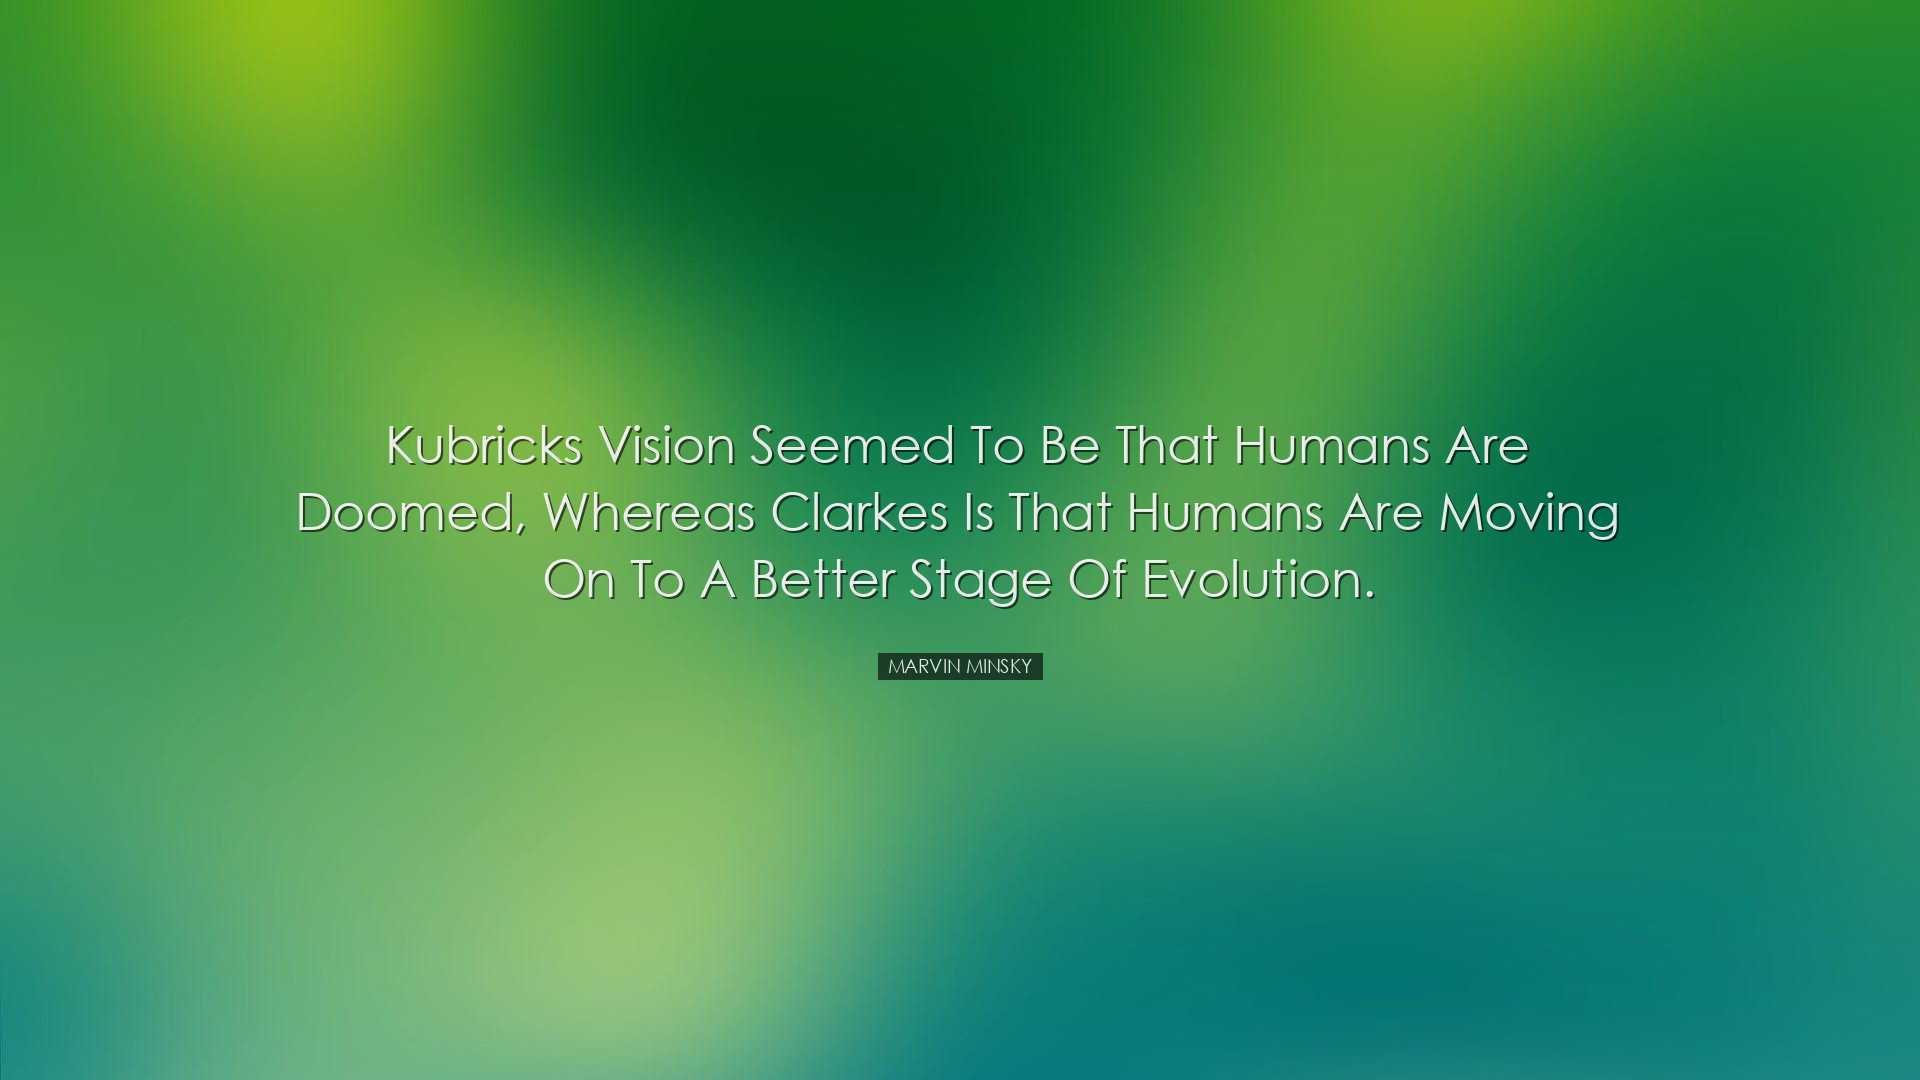 Kubricks vision seemed to be that humans are doomed, whereas Clark